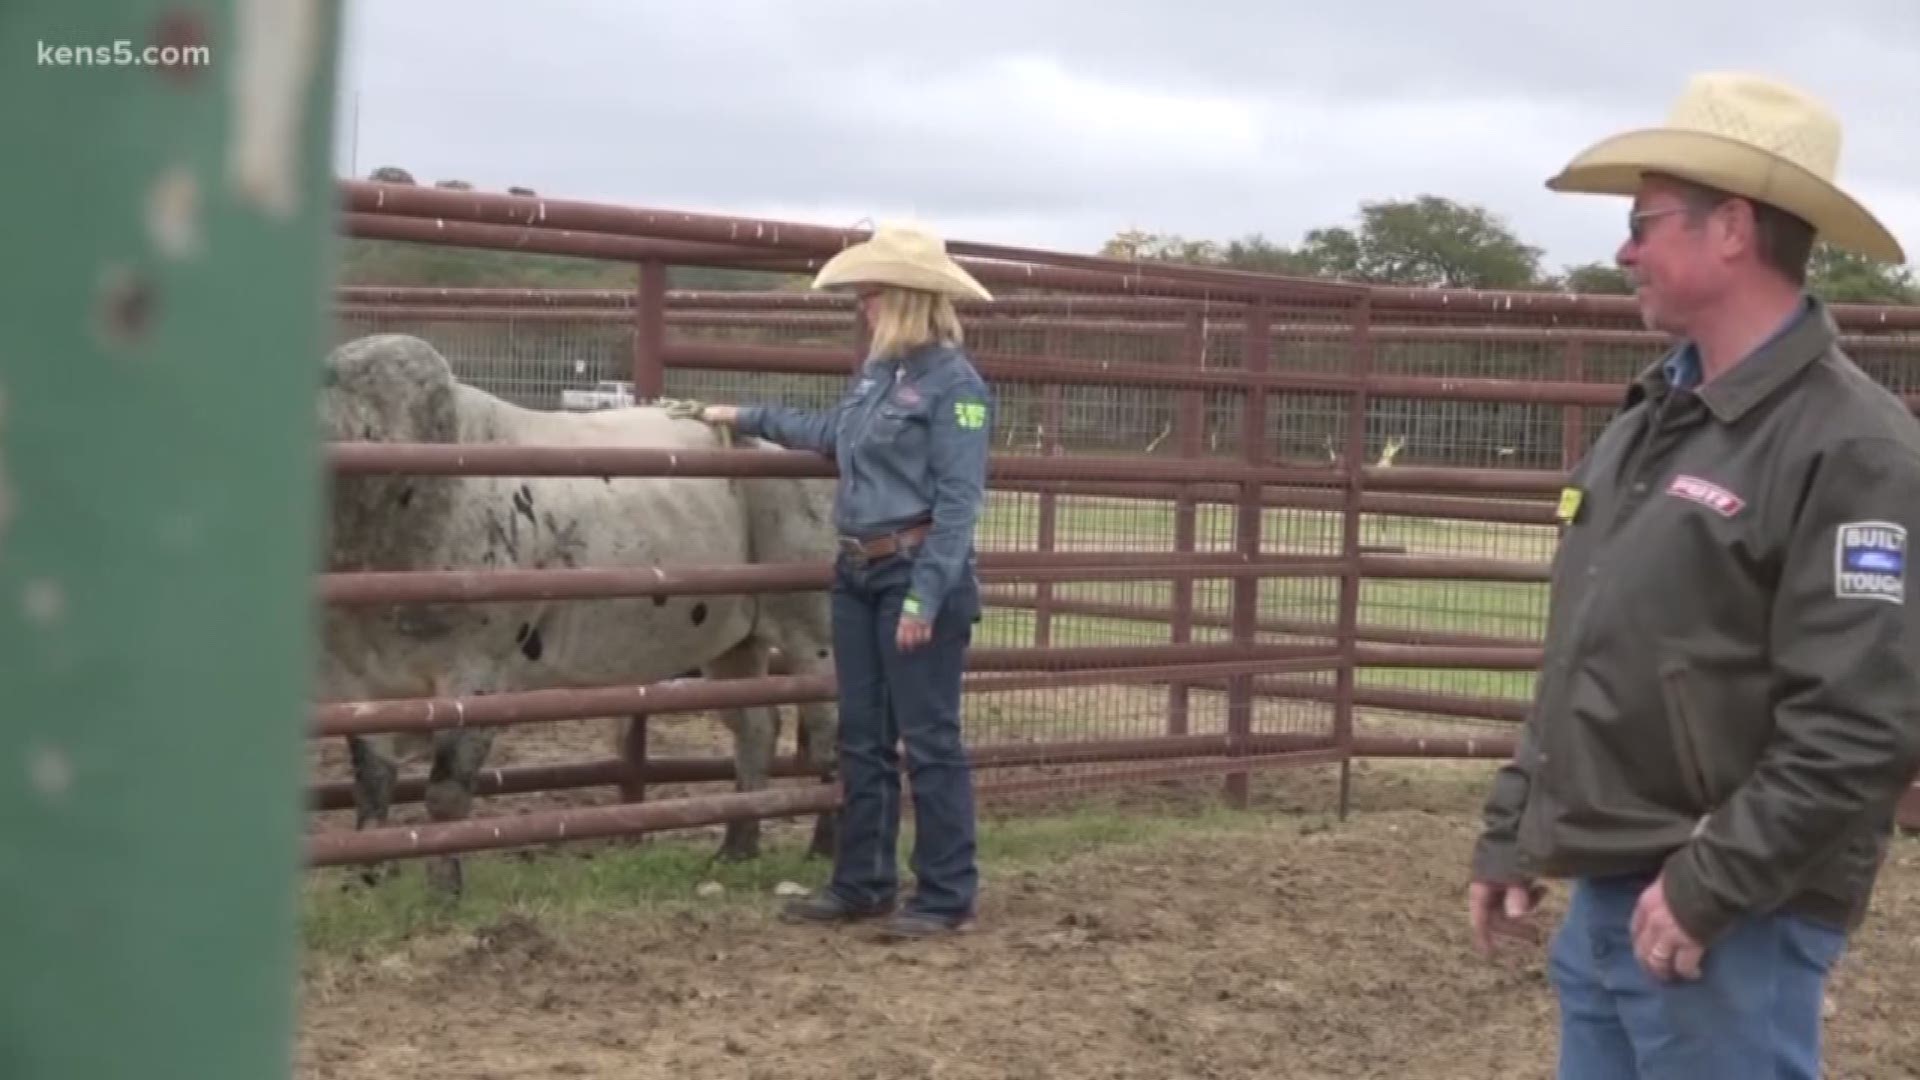 Bull riding is much more than a sport for one South Texas family.